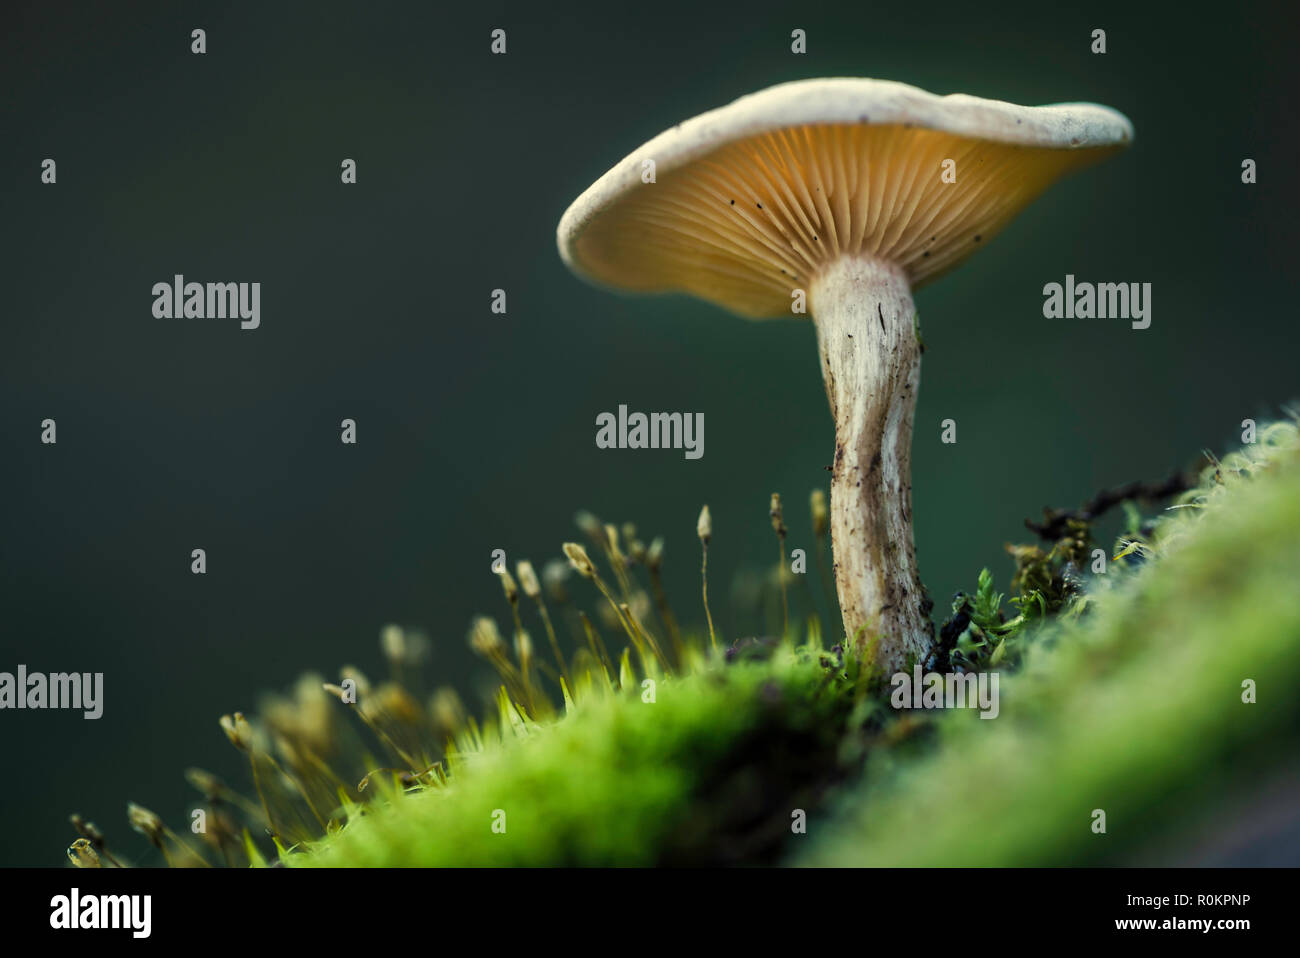 Small mushroom seen from below among the green moss Stock Photo